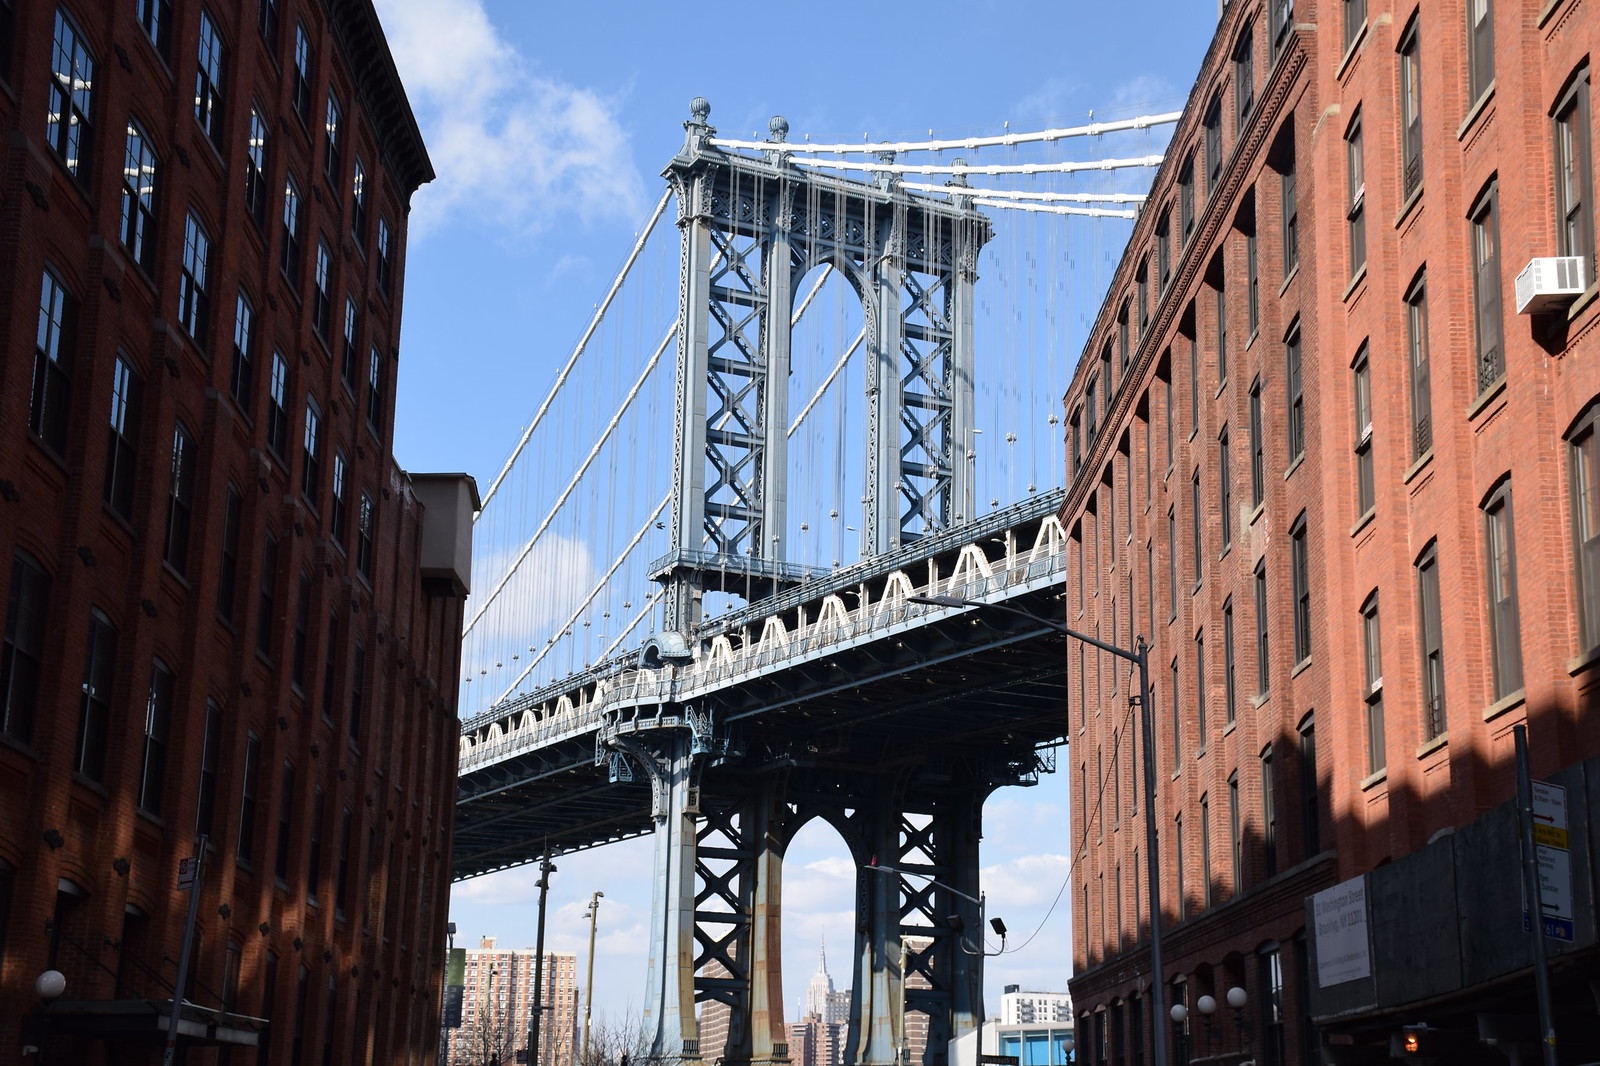 Famous views of the Manhattan Bridge from the streets of Brooklyn